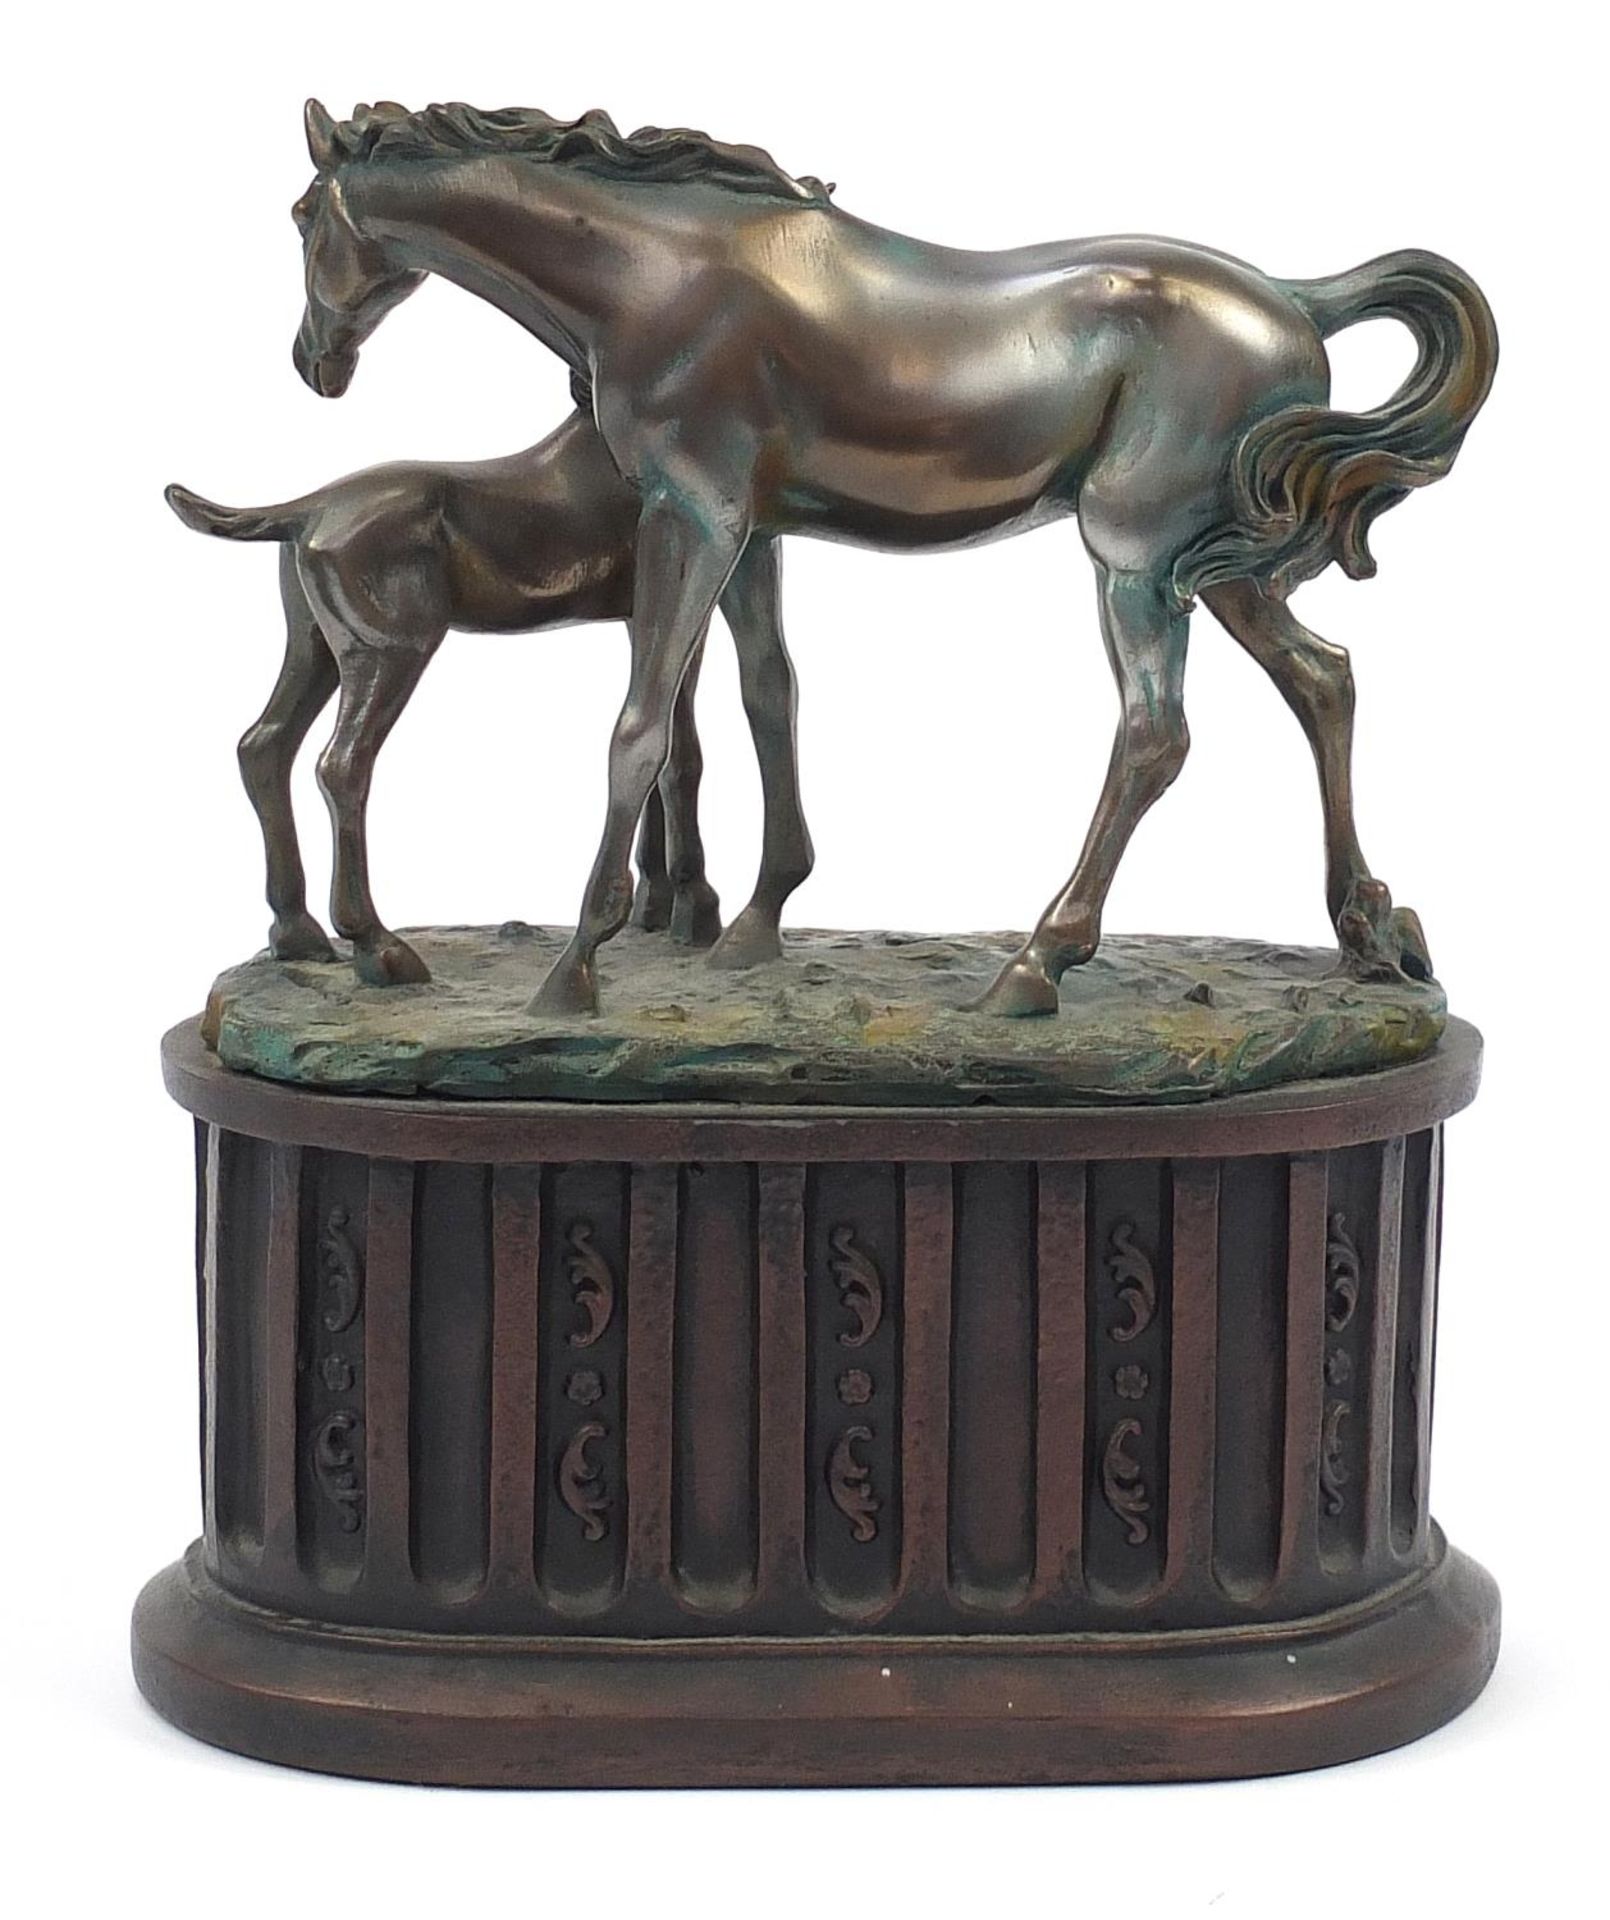 Bronzed horse design mantle clock with Roman numerals, 24.5cm wide - Image 2 of 3